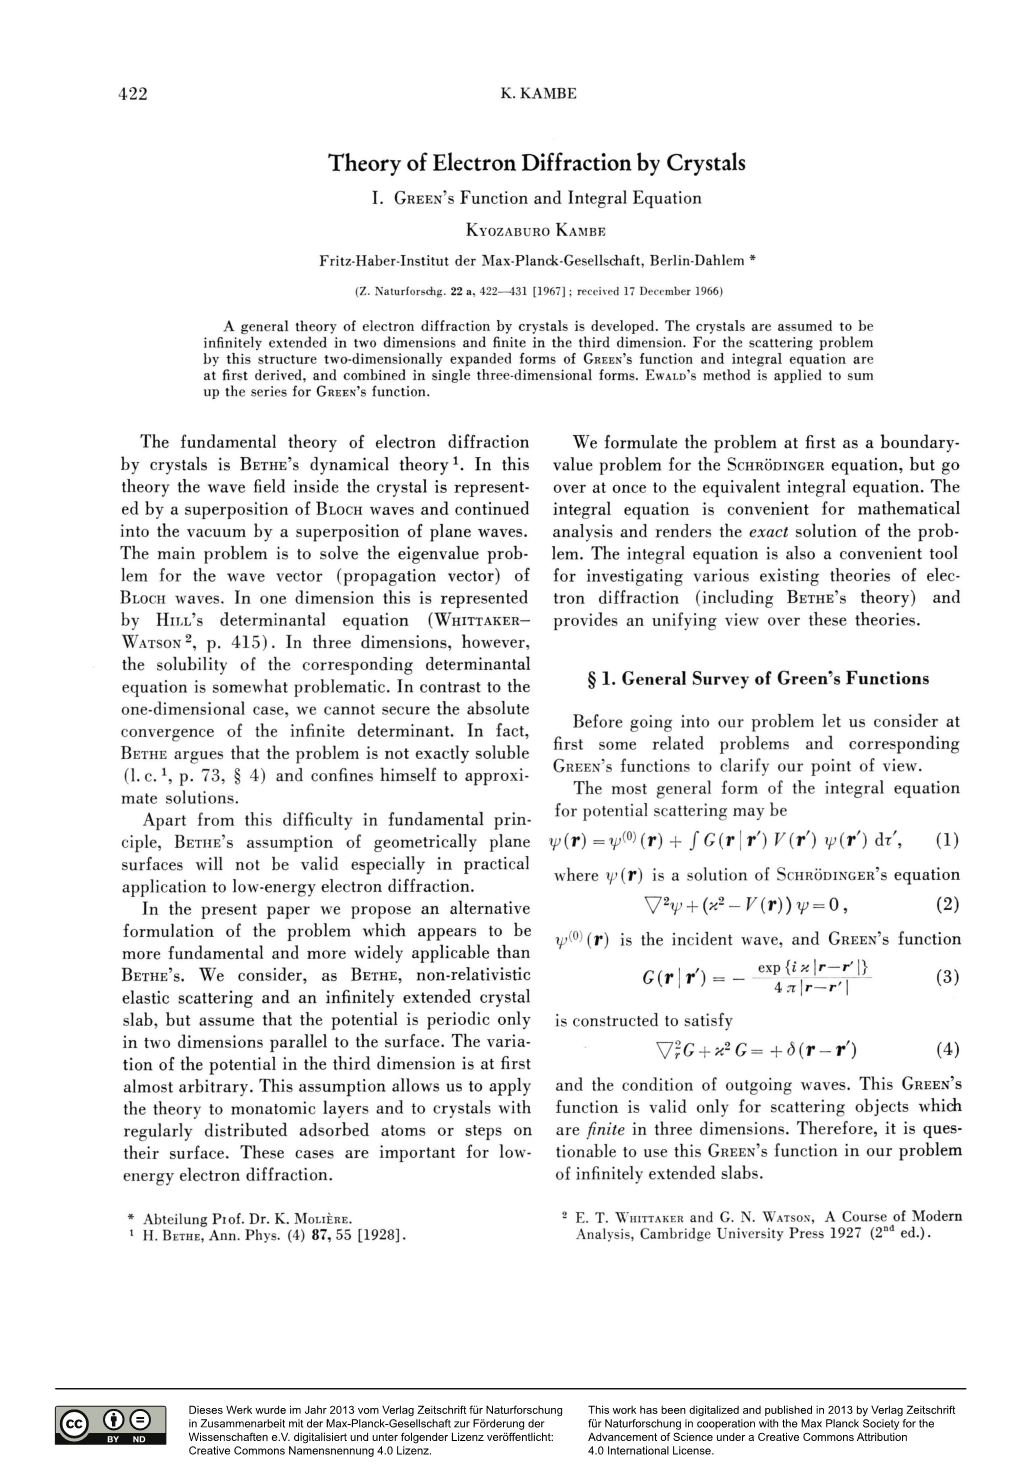 Theory of Electron Diffraction by Crystals (1) C(Rii')